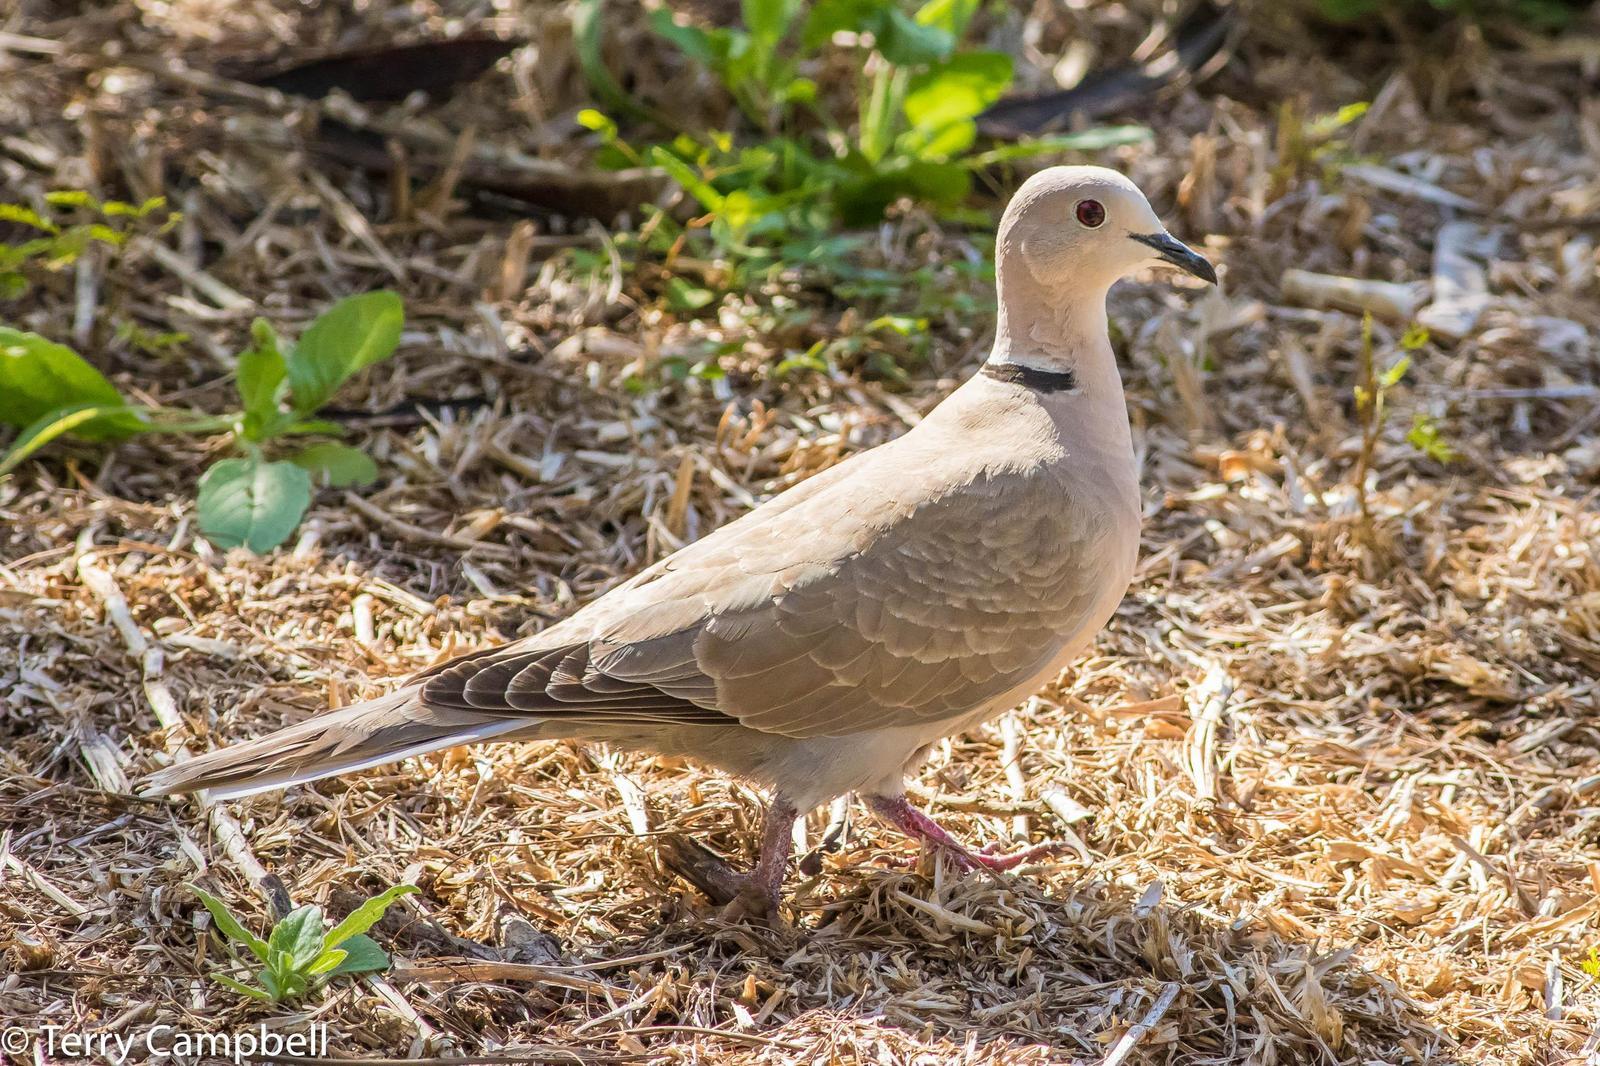 Eurasian Collared-Dove Photo by Terry Campbell